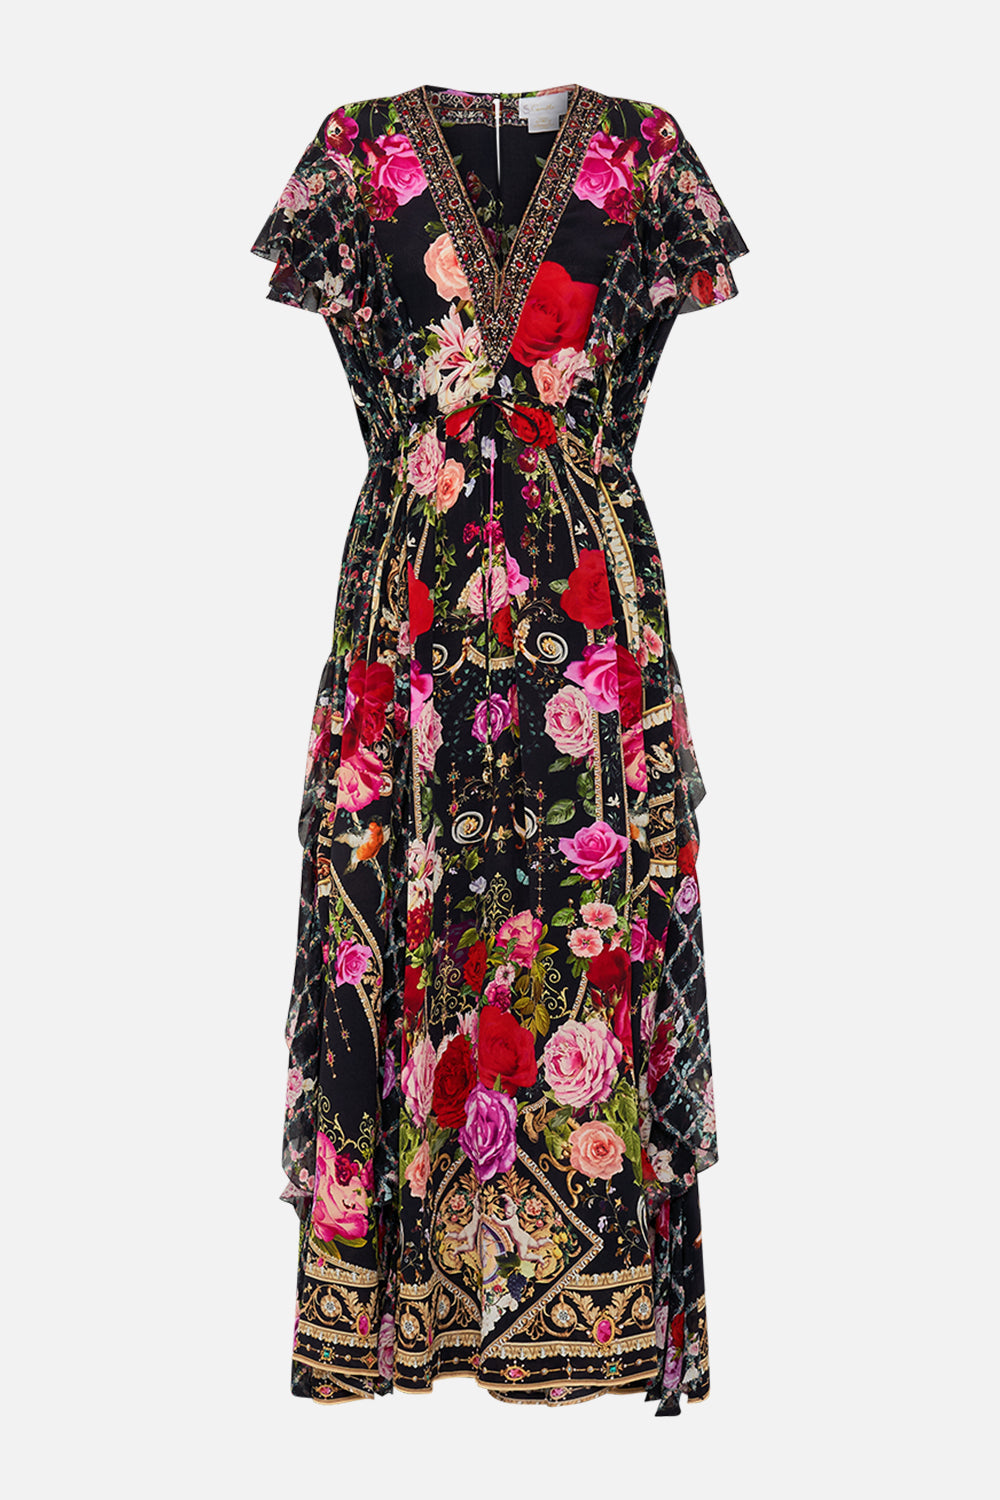 Product view of CAMILLA designer floral ruffle dress in Reservation For Love print